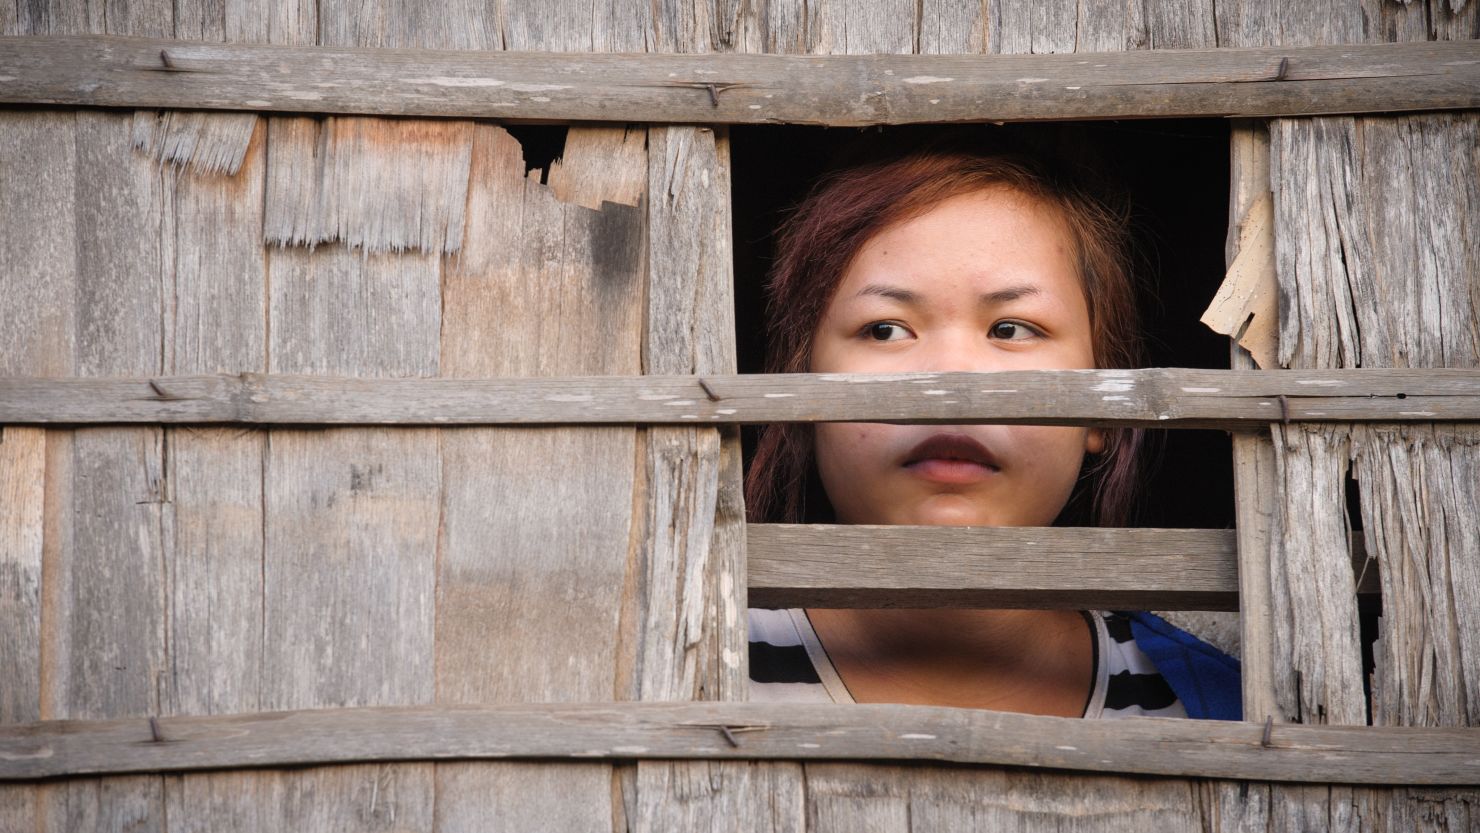 Savoeun was saved from a trafficker by her sister who had been trained to spot the signs of traffickers by World Vision, and Cambodian national police, who had been trained by the FBI.